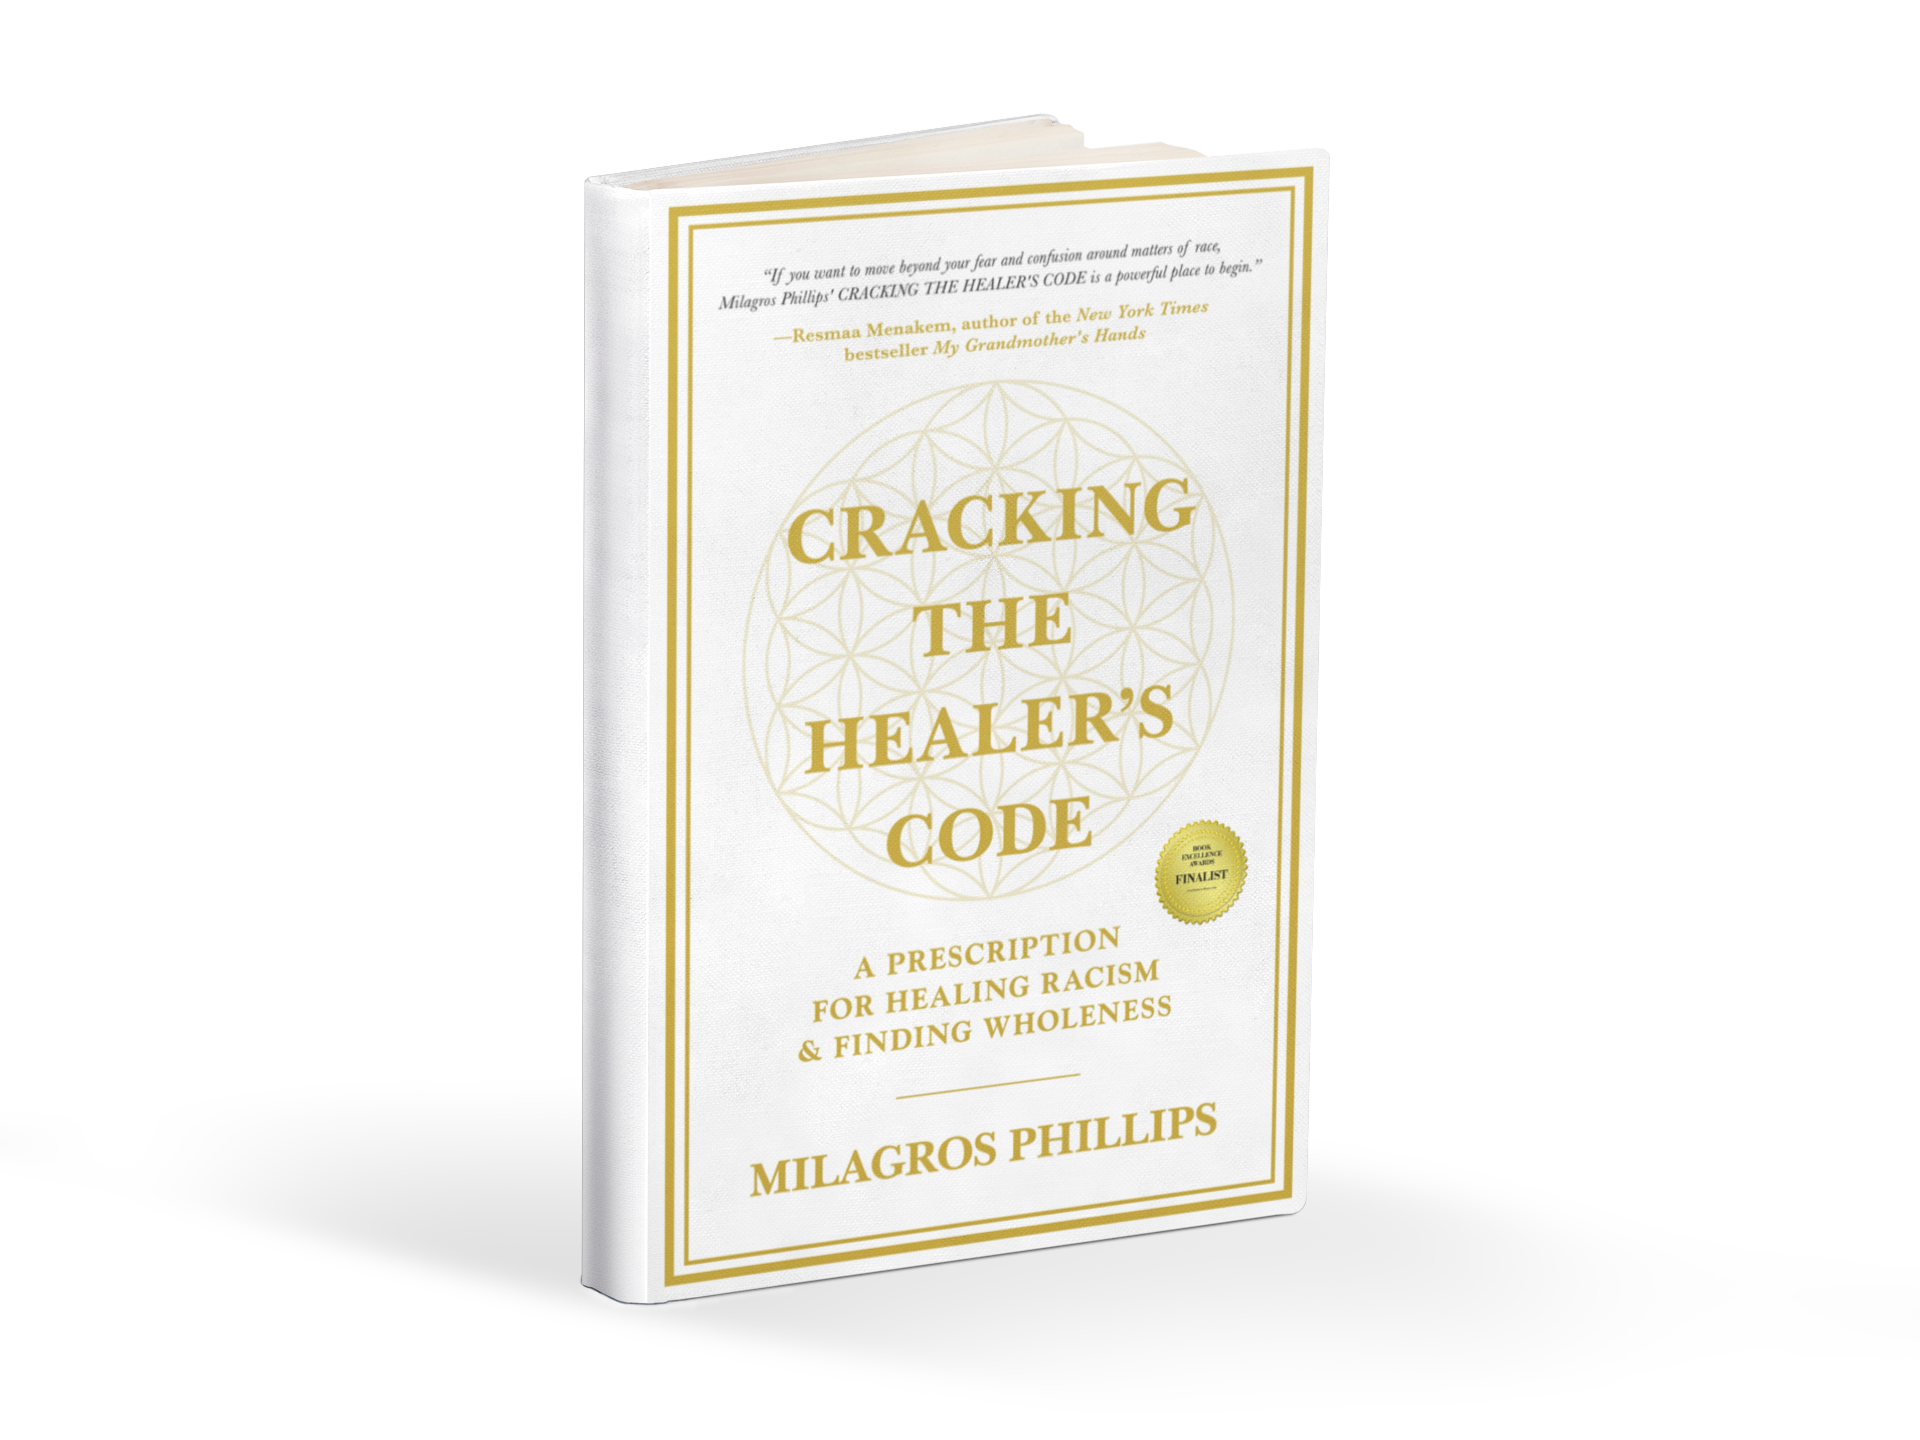 The Race Healer, Milagros Phillips, Honored with Top Book Award For Cracking the Healer's Code - A Prescription for Healing Racism & Finding Wholeness